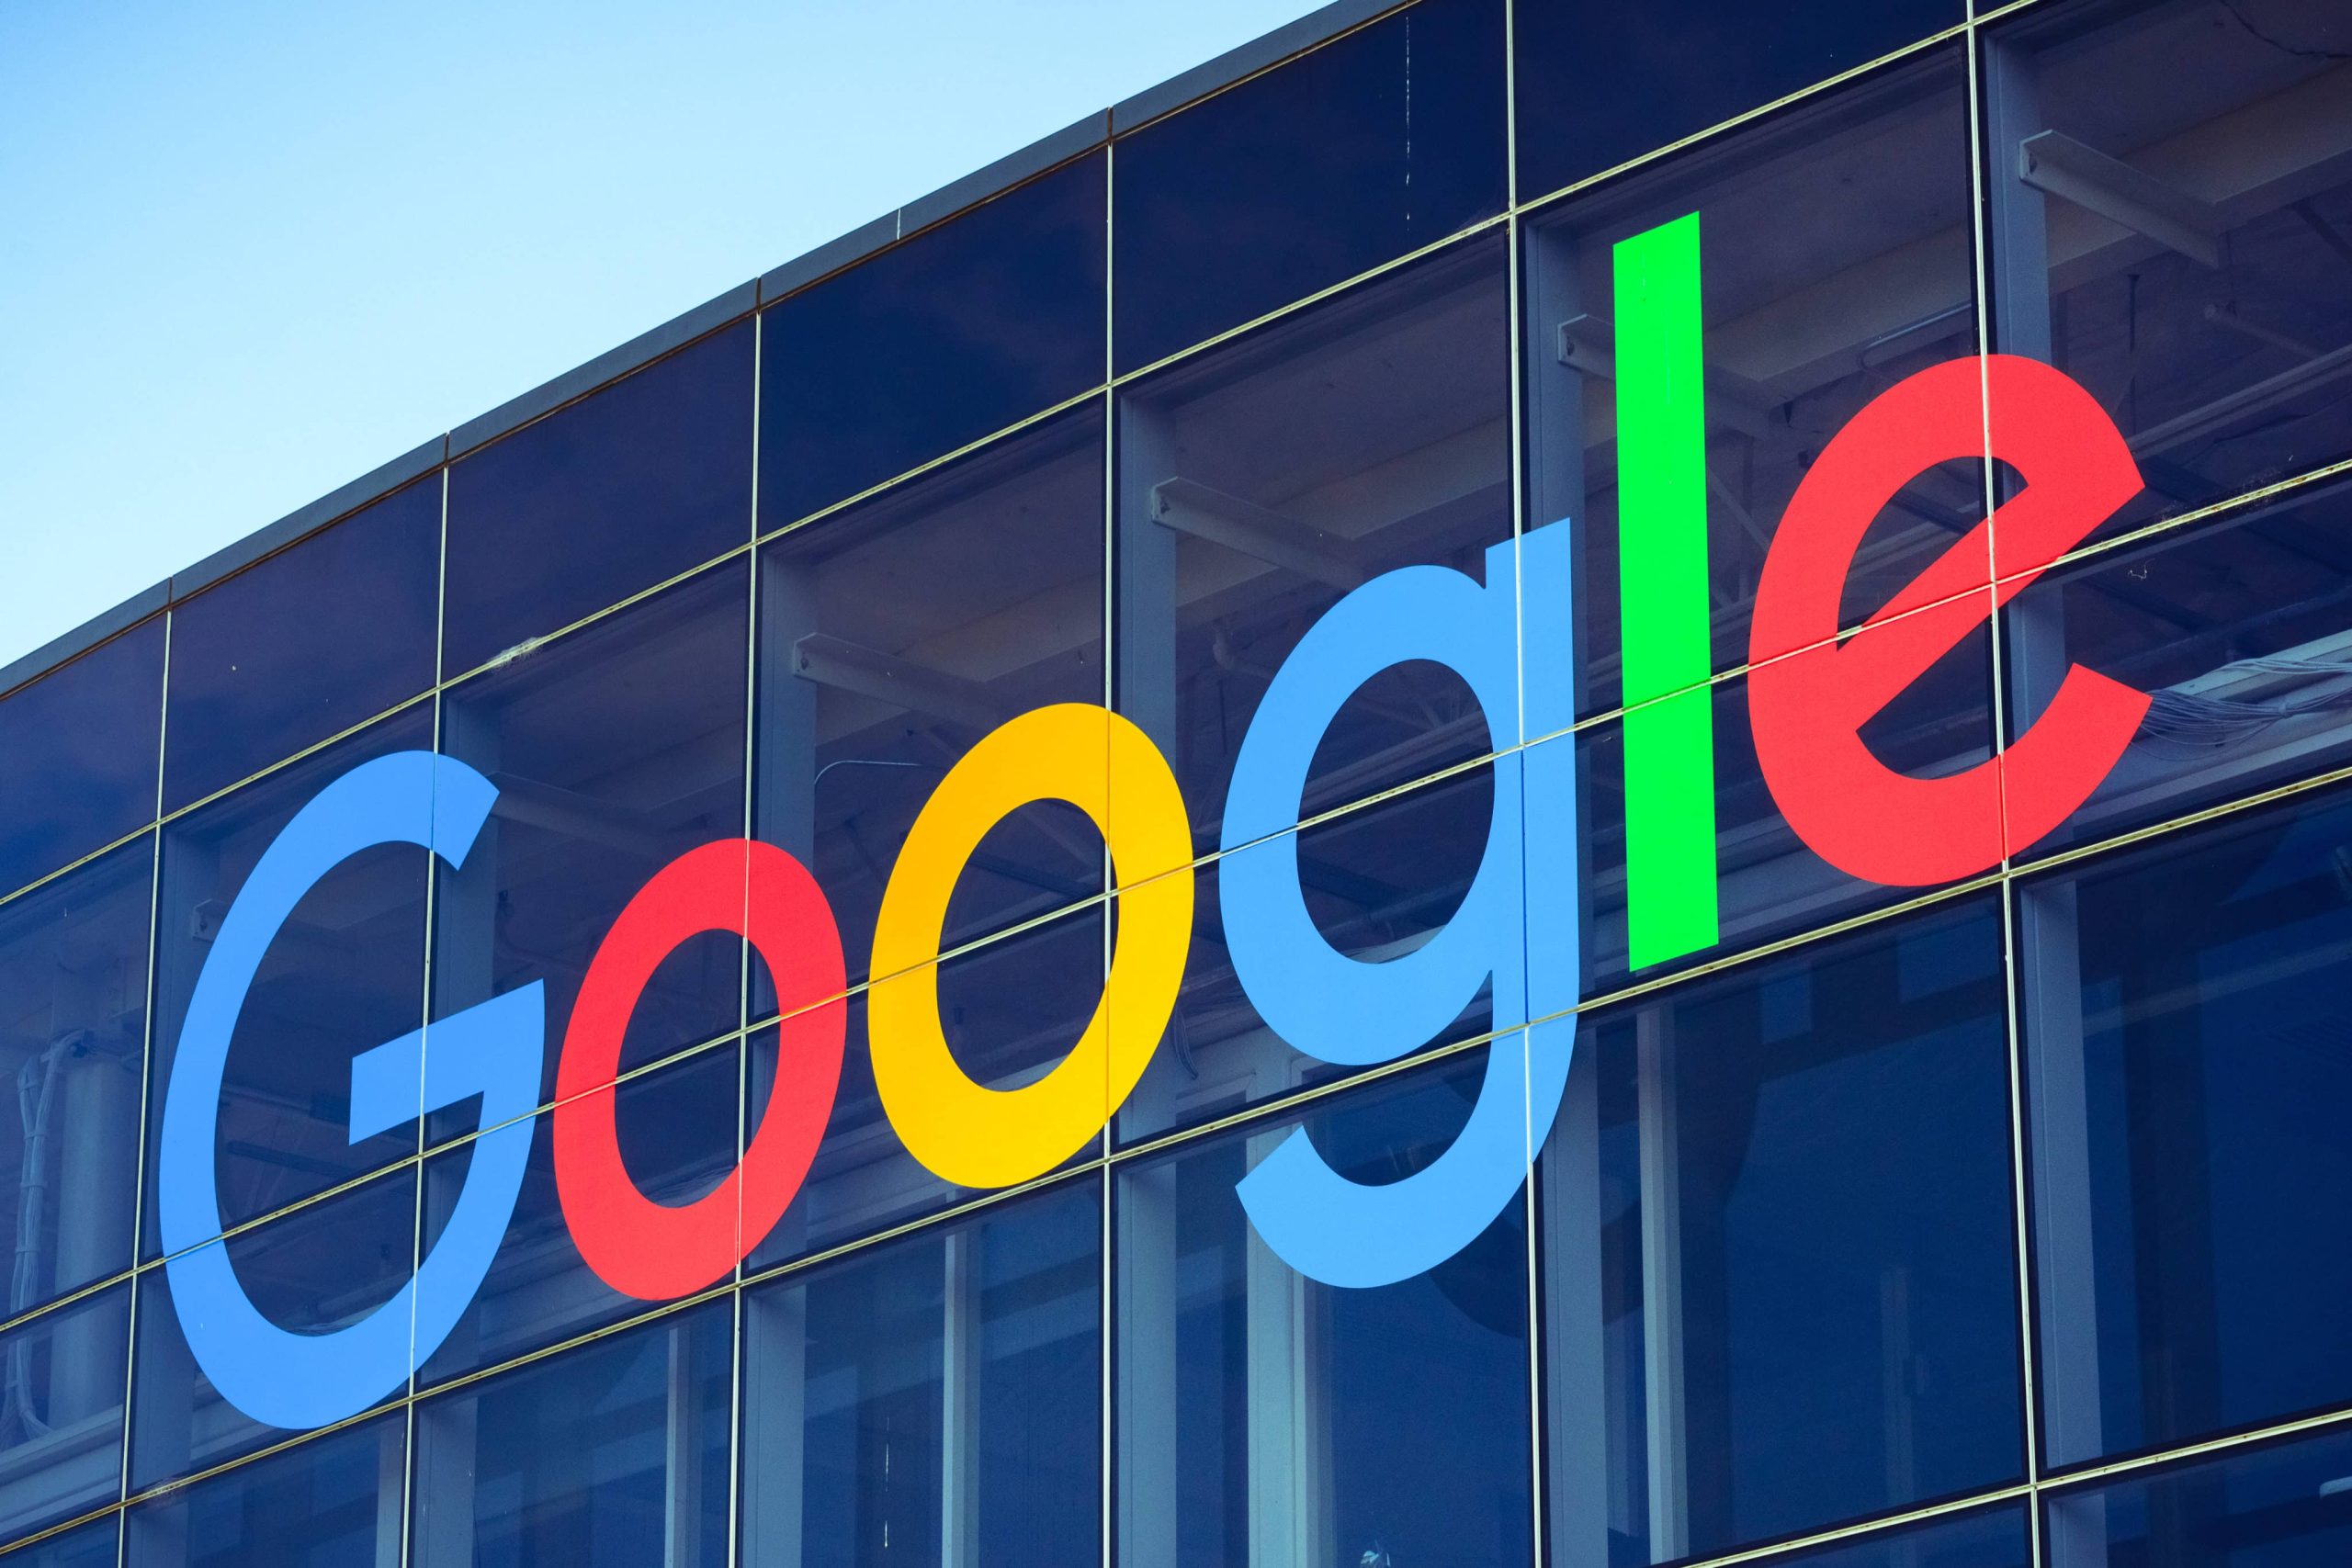 Google Updates Policy To Allow Hemp, CBD Products with Certification